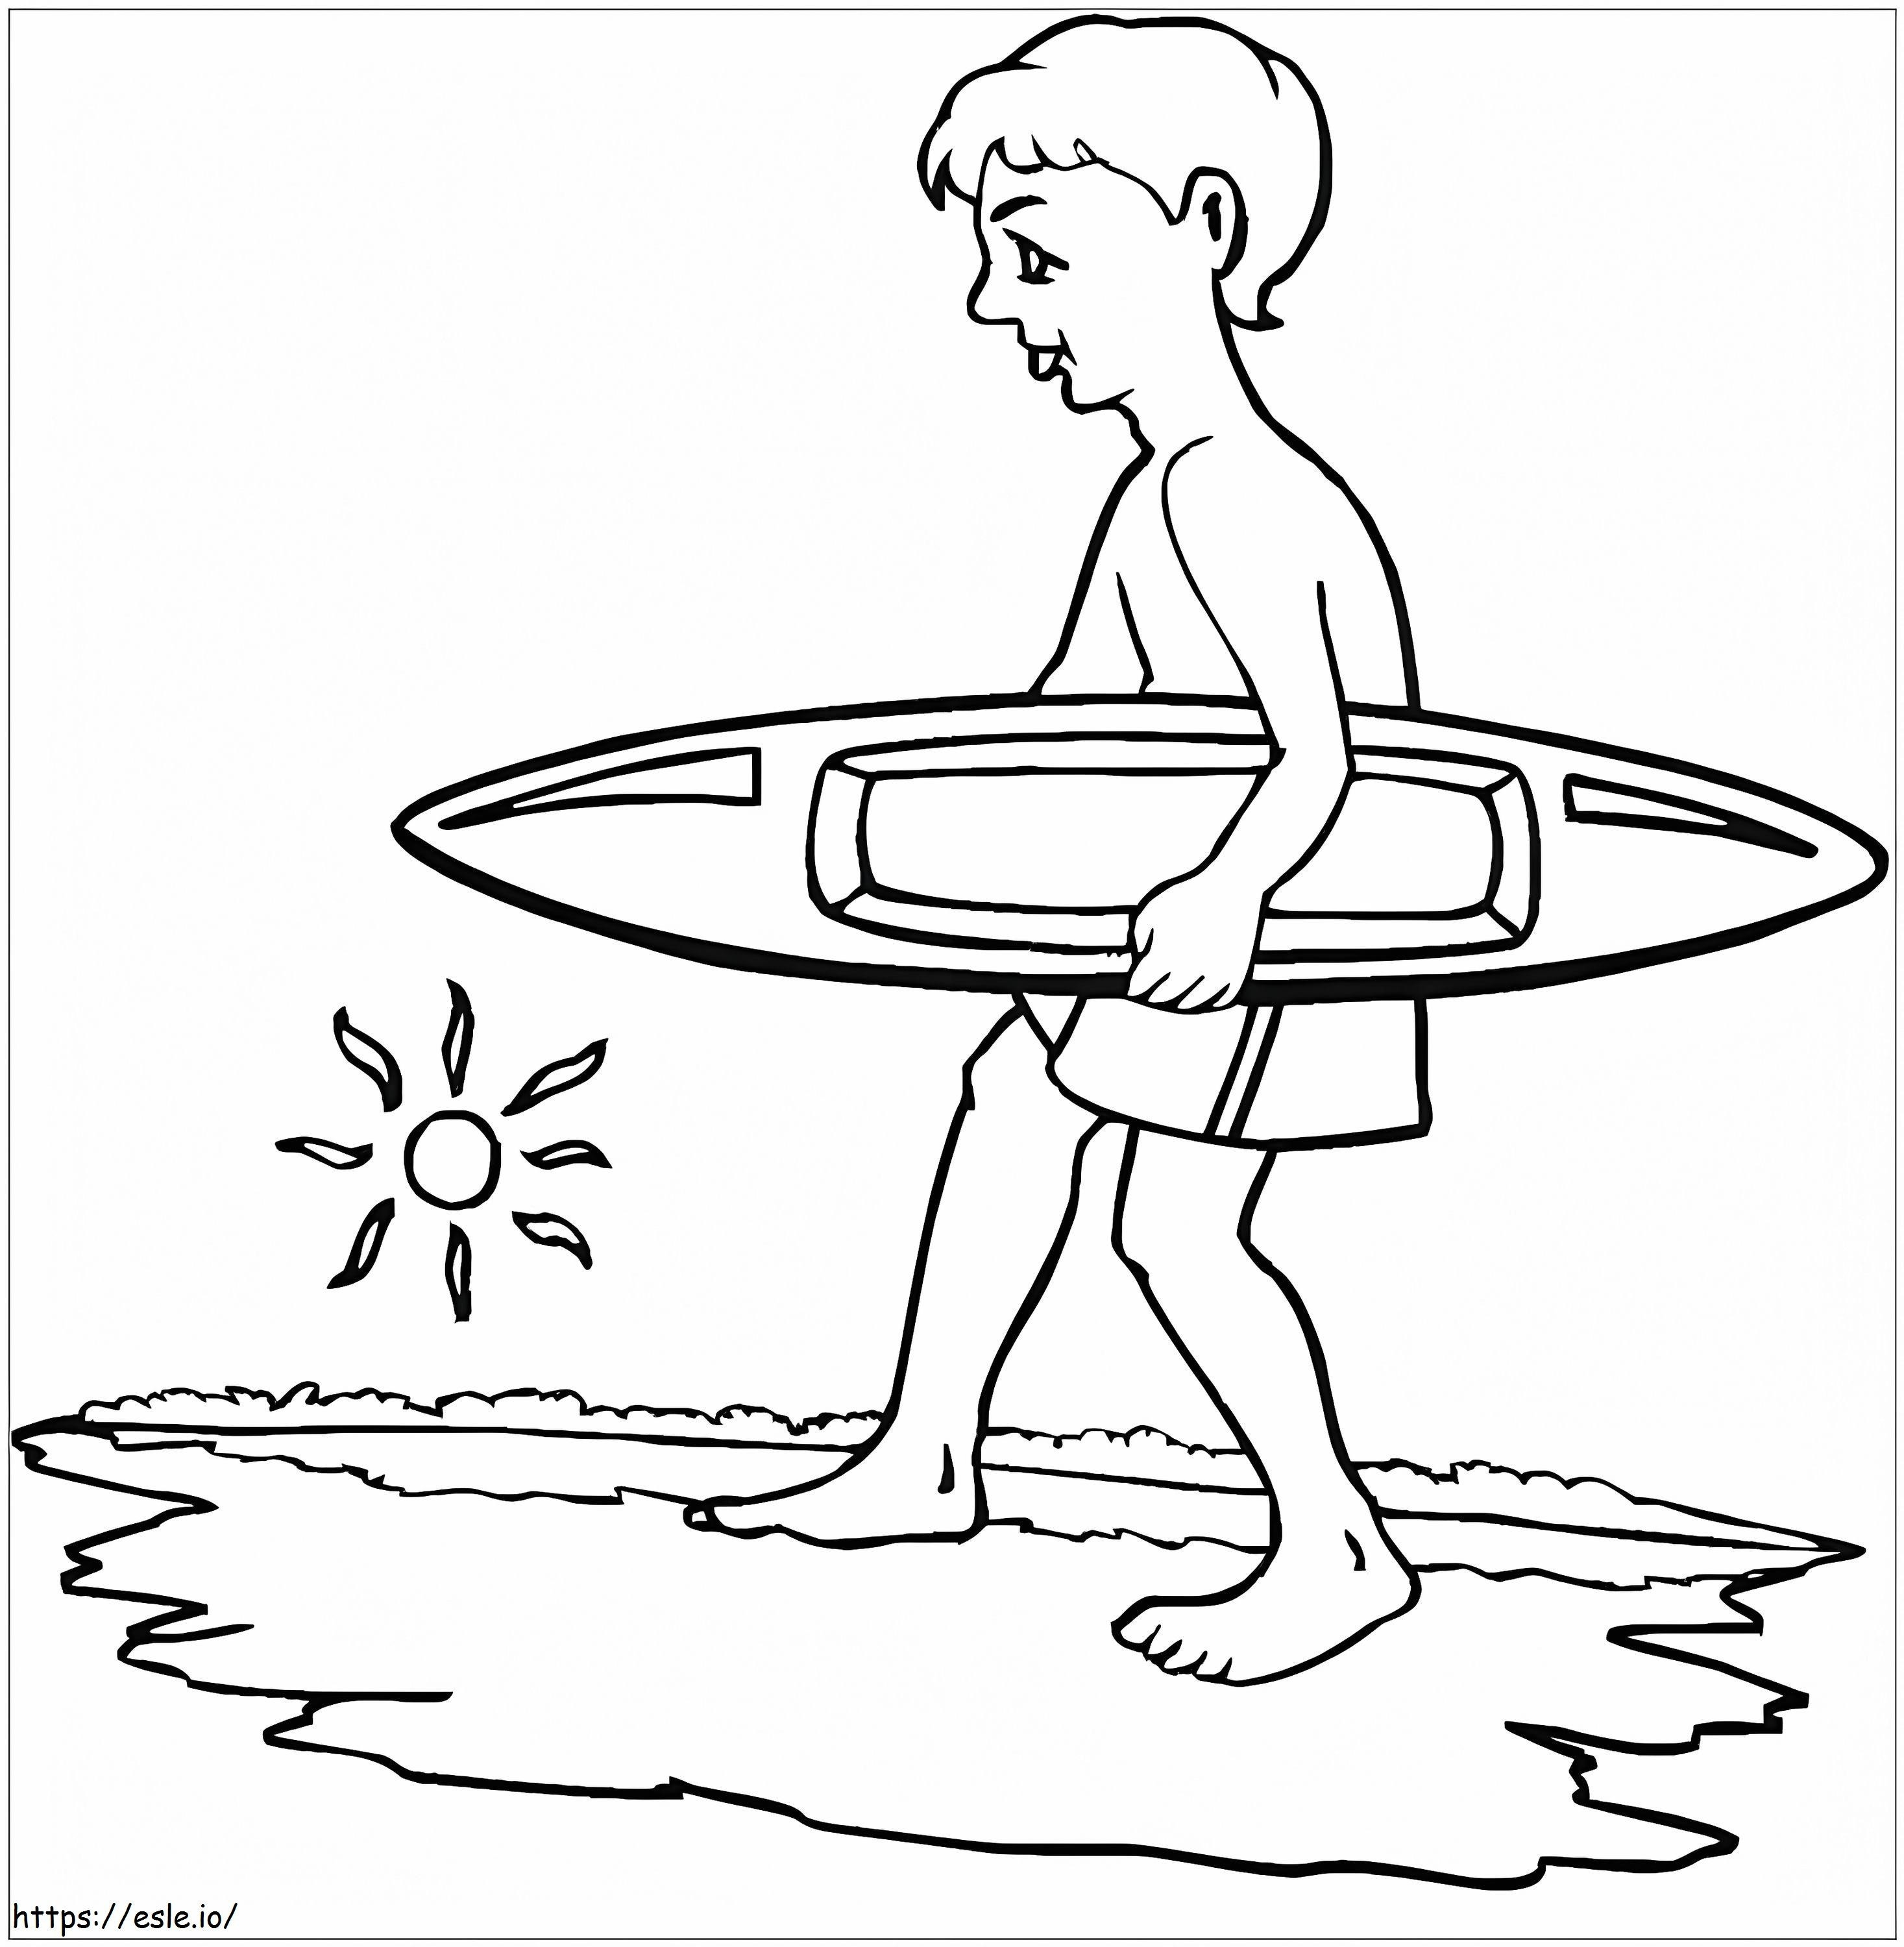 Boy Holding Surfboard coloring page